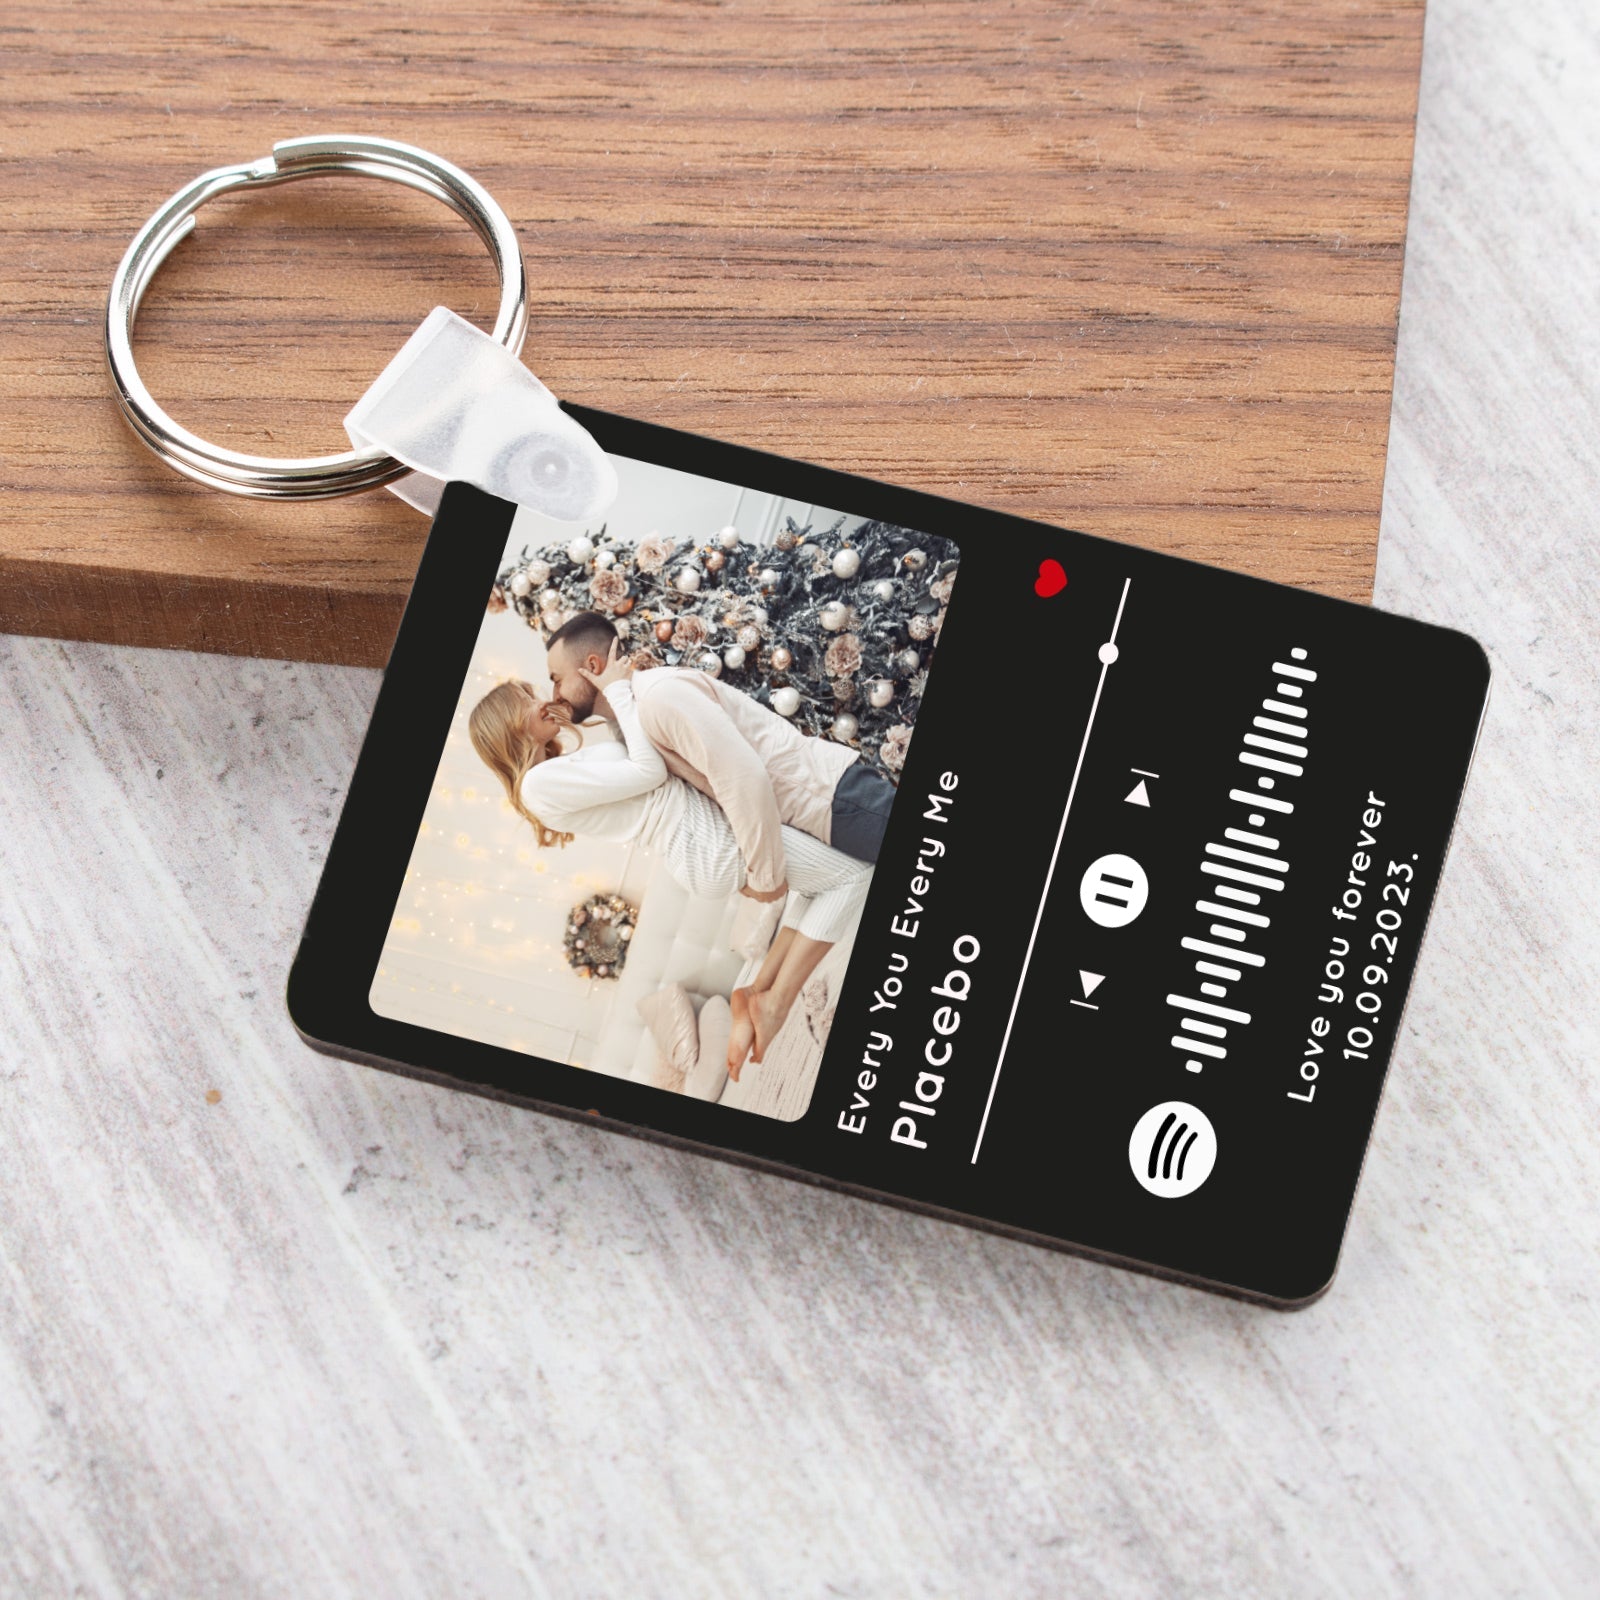 Personalised Spotify Code Keychain Plaque, Custom Engraved Acrylic Song Album Cover with Photo, Customized Music Picture Keyring 70X50mm